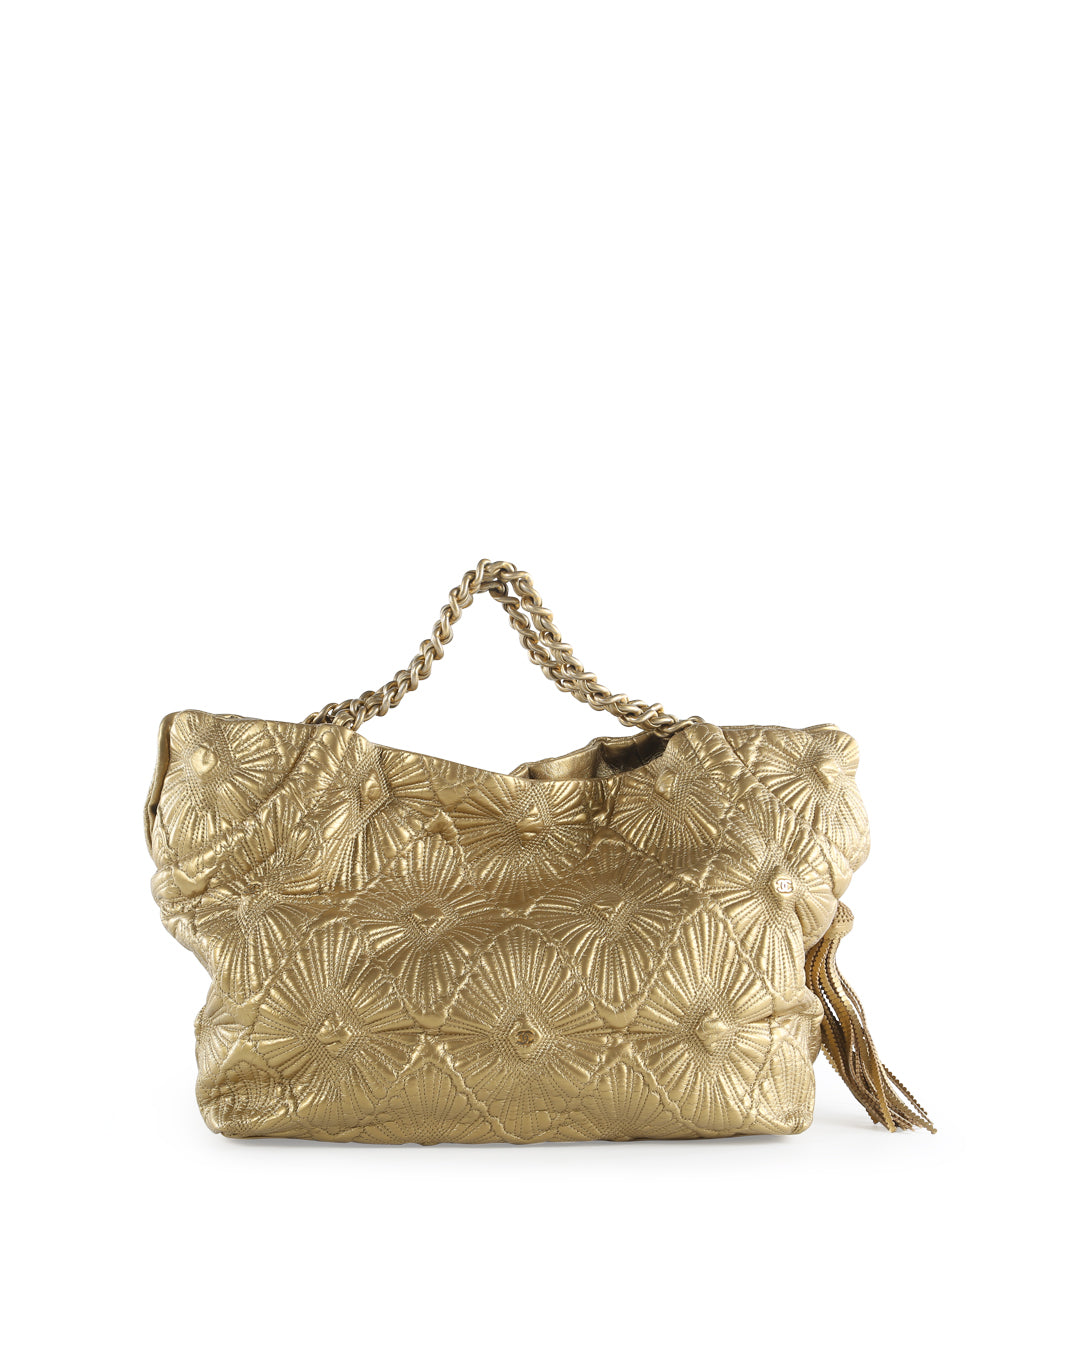 CHANEL Gold Calfskin Leather Embroidered Ca D'Oro Tote Bag